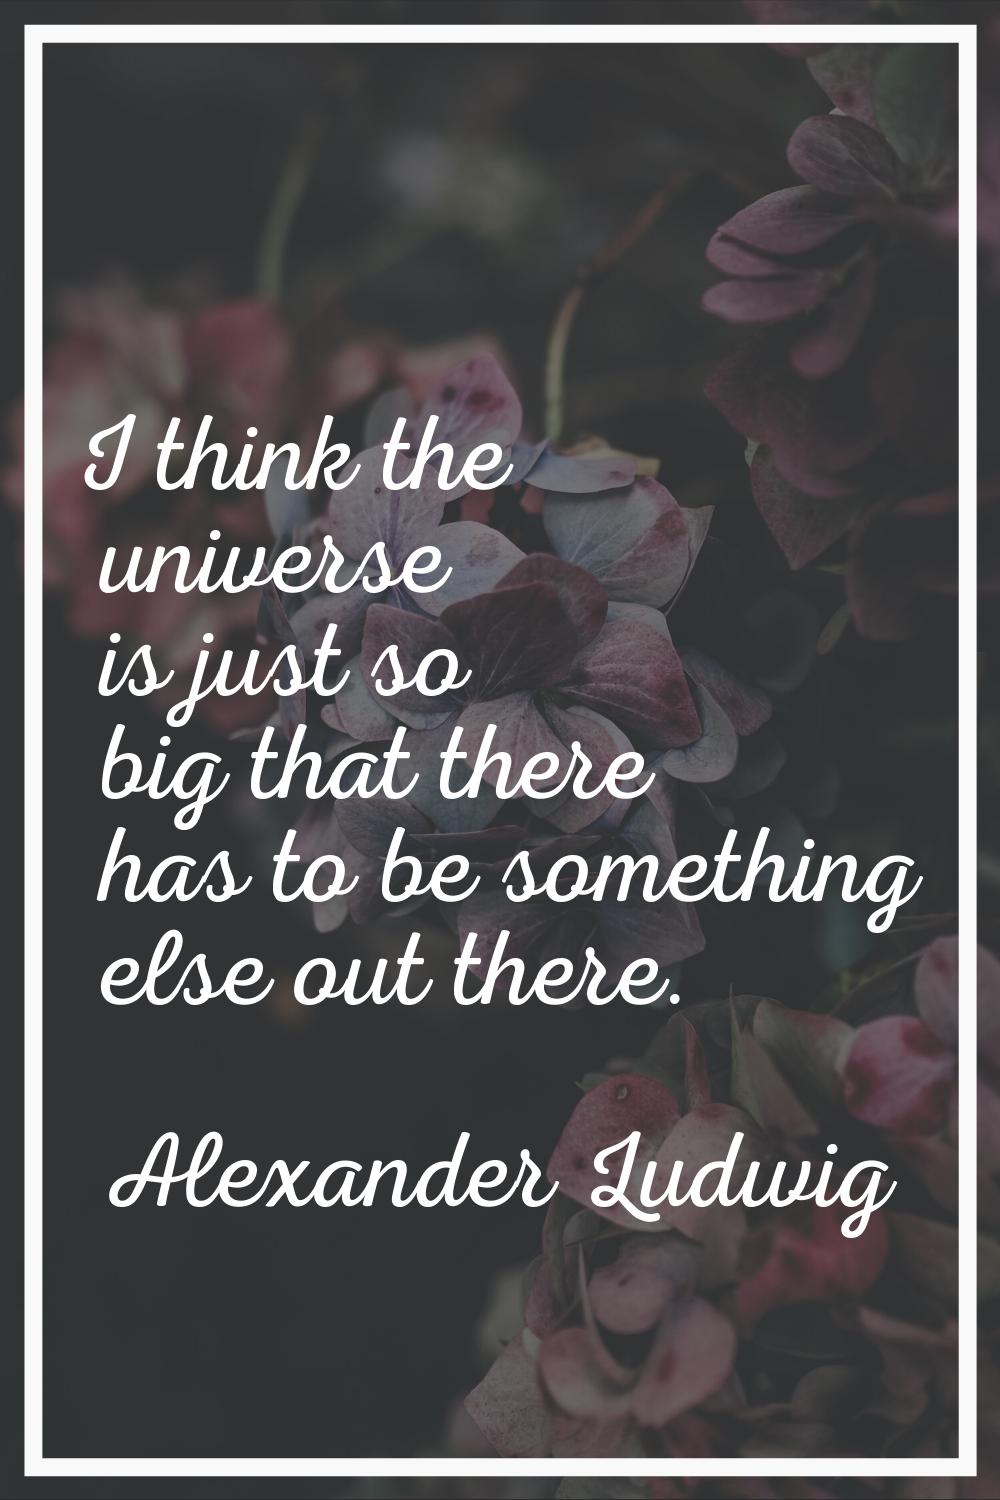 I think the universe is just so big that there has to be something else out there.